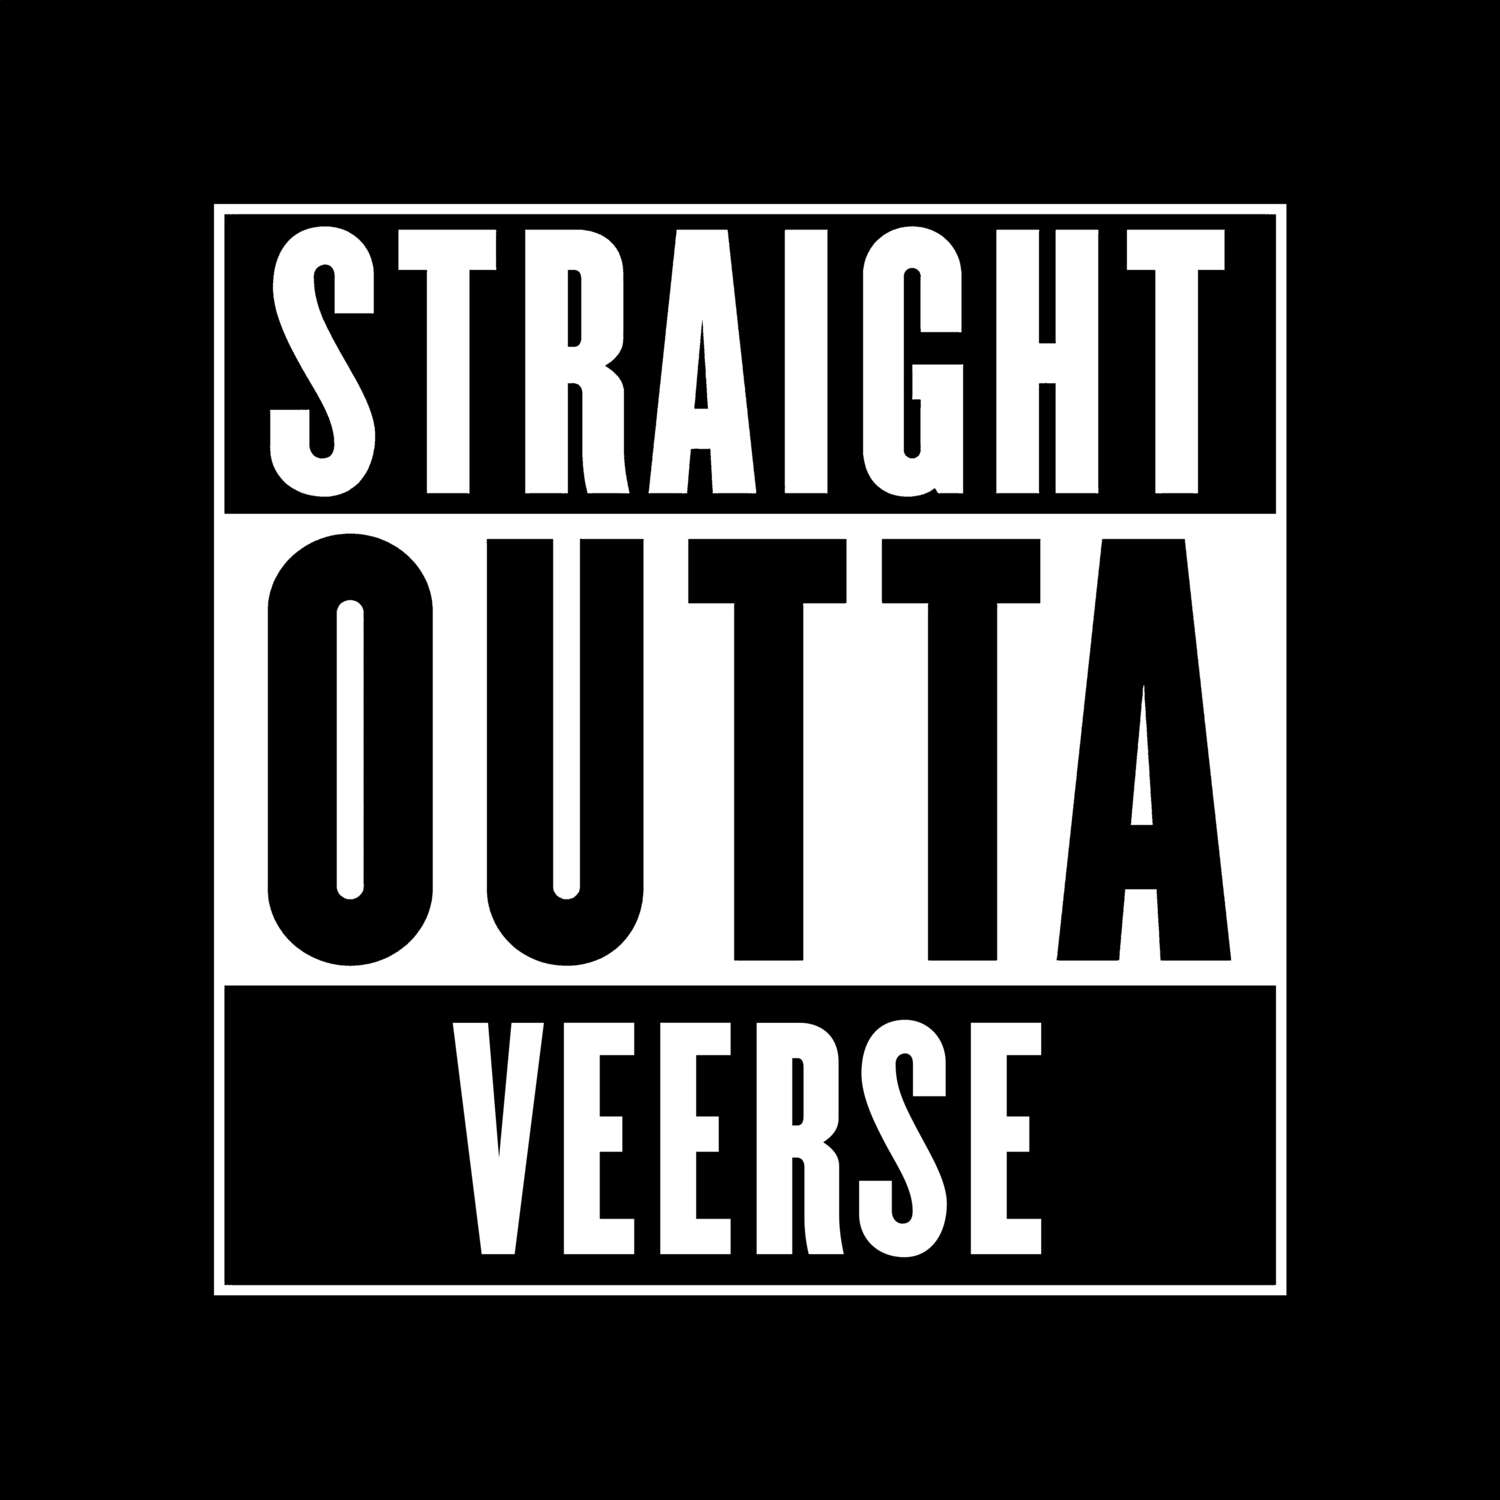 Veerse T-Shirt »Straight Outta«